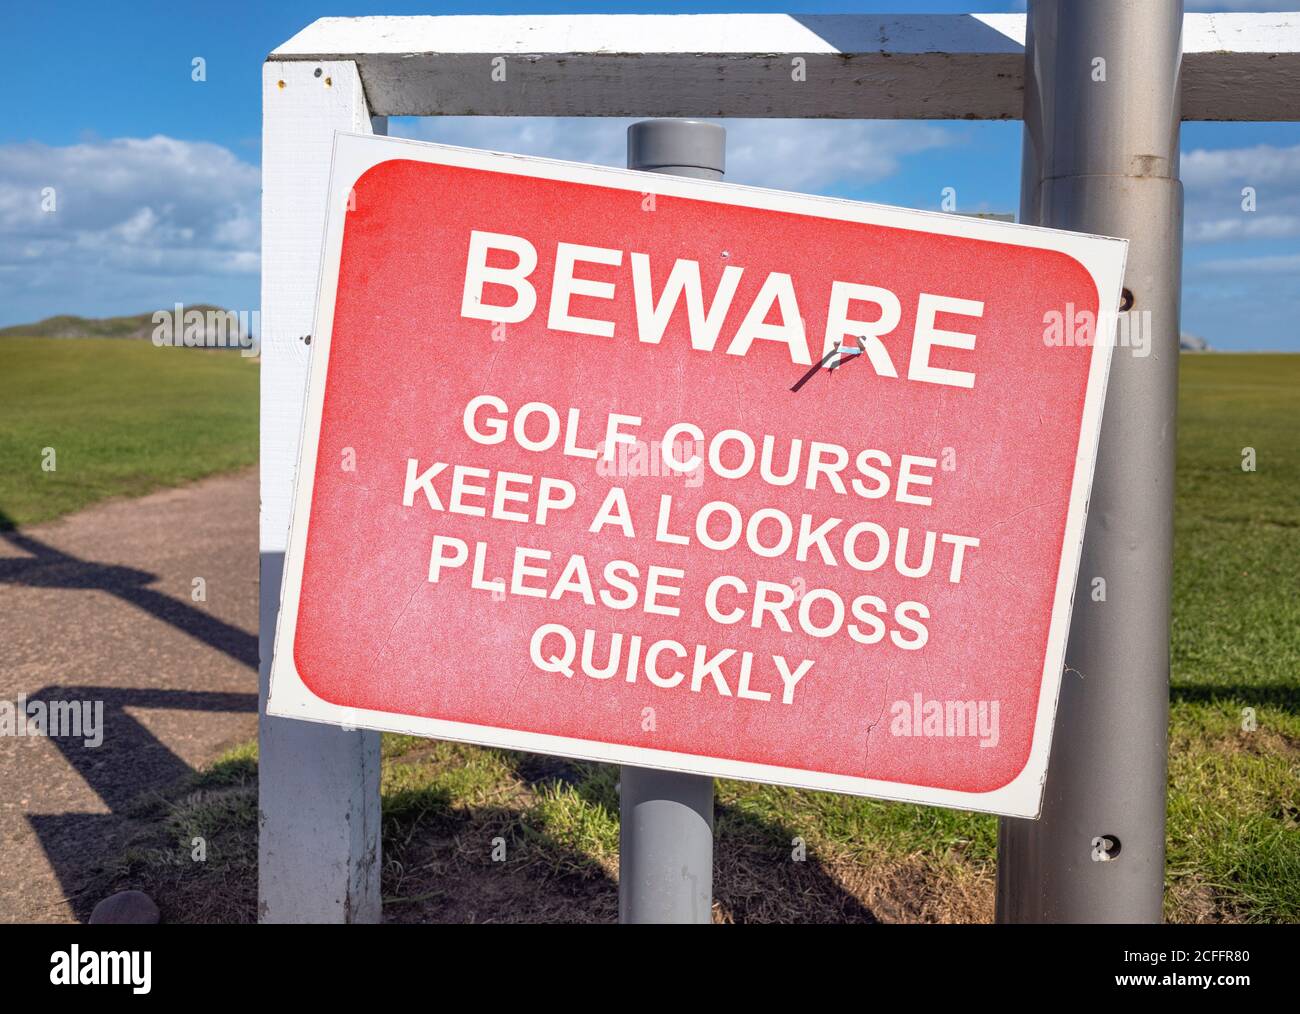 Beware Golf Course Keep A Lookout Please Cross Quickly, North Berwick, East Lothian, Scotland, UK. Stock Photo